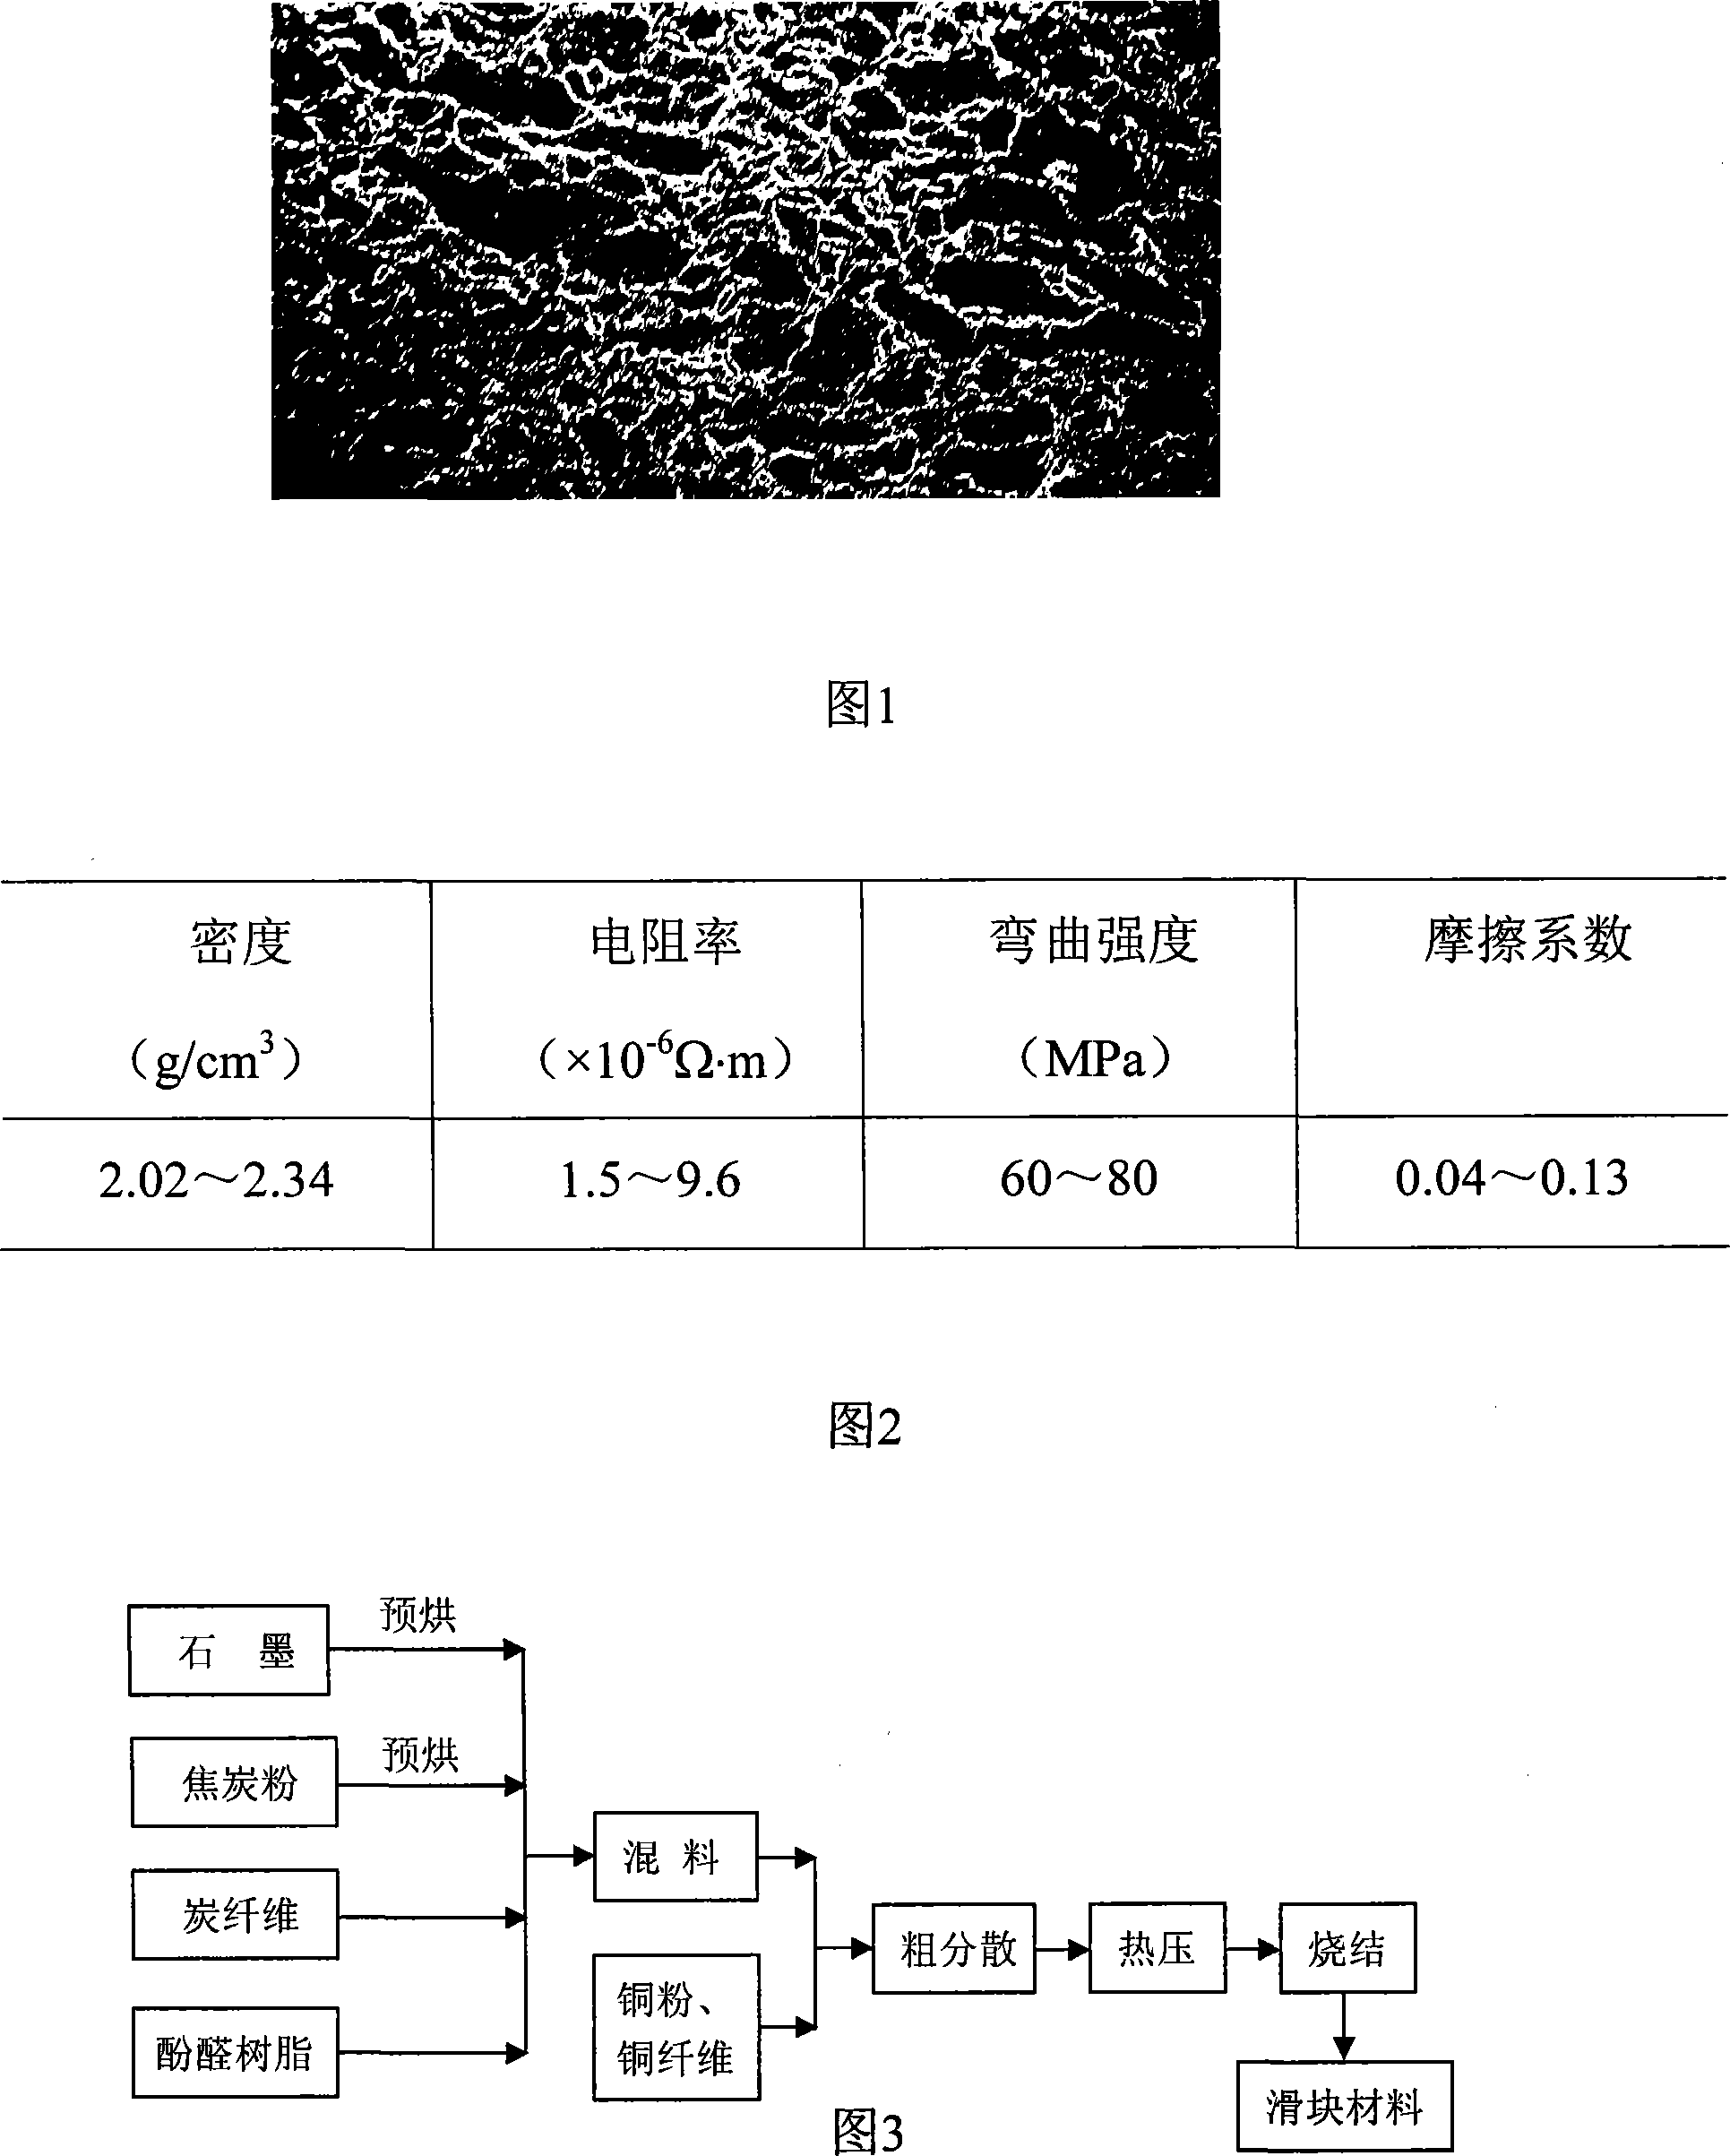 Carbon base composite material for collector shoe sliding block and its preparation method